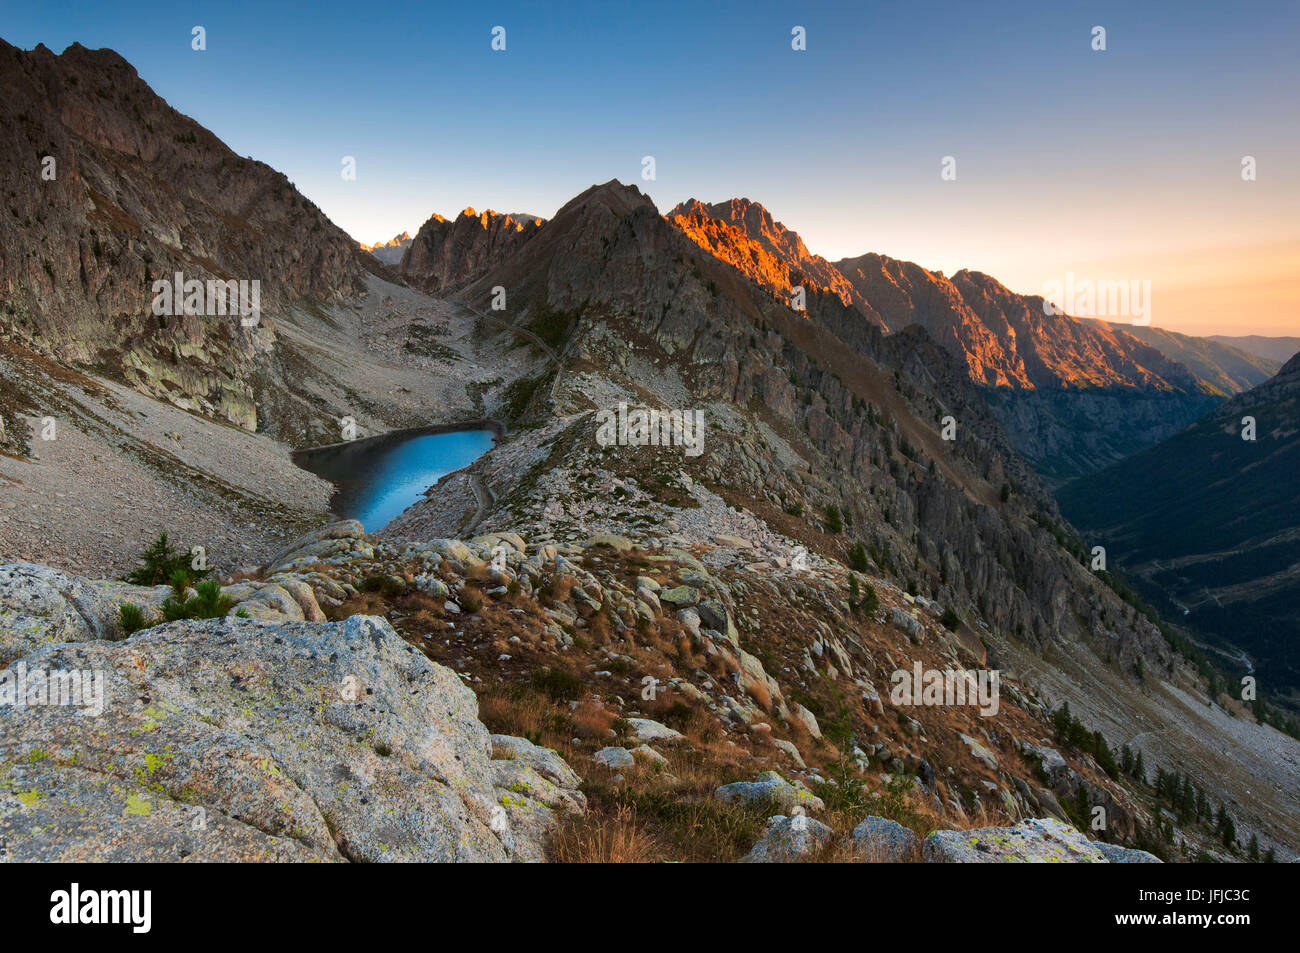 Italy, Piedmont, Cuneo District, Gesso Valley, Alpi Marittime Natural Park, sunrise at Fremamorta lake Stock Photo